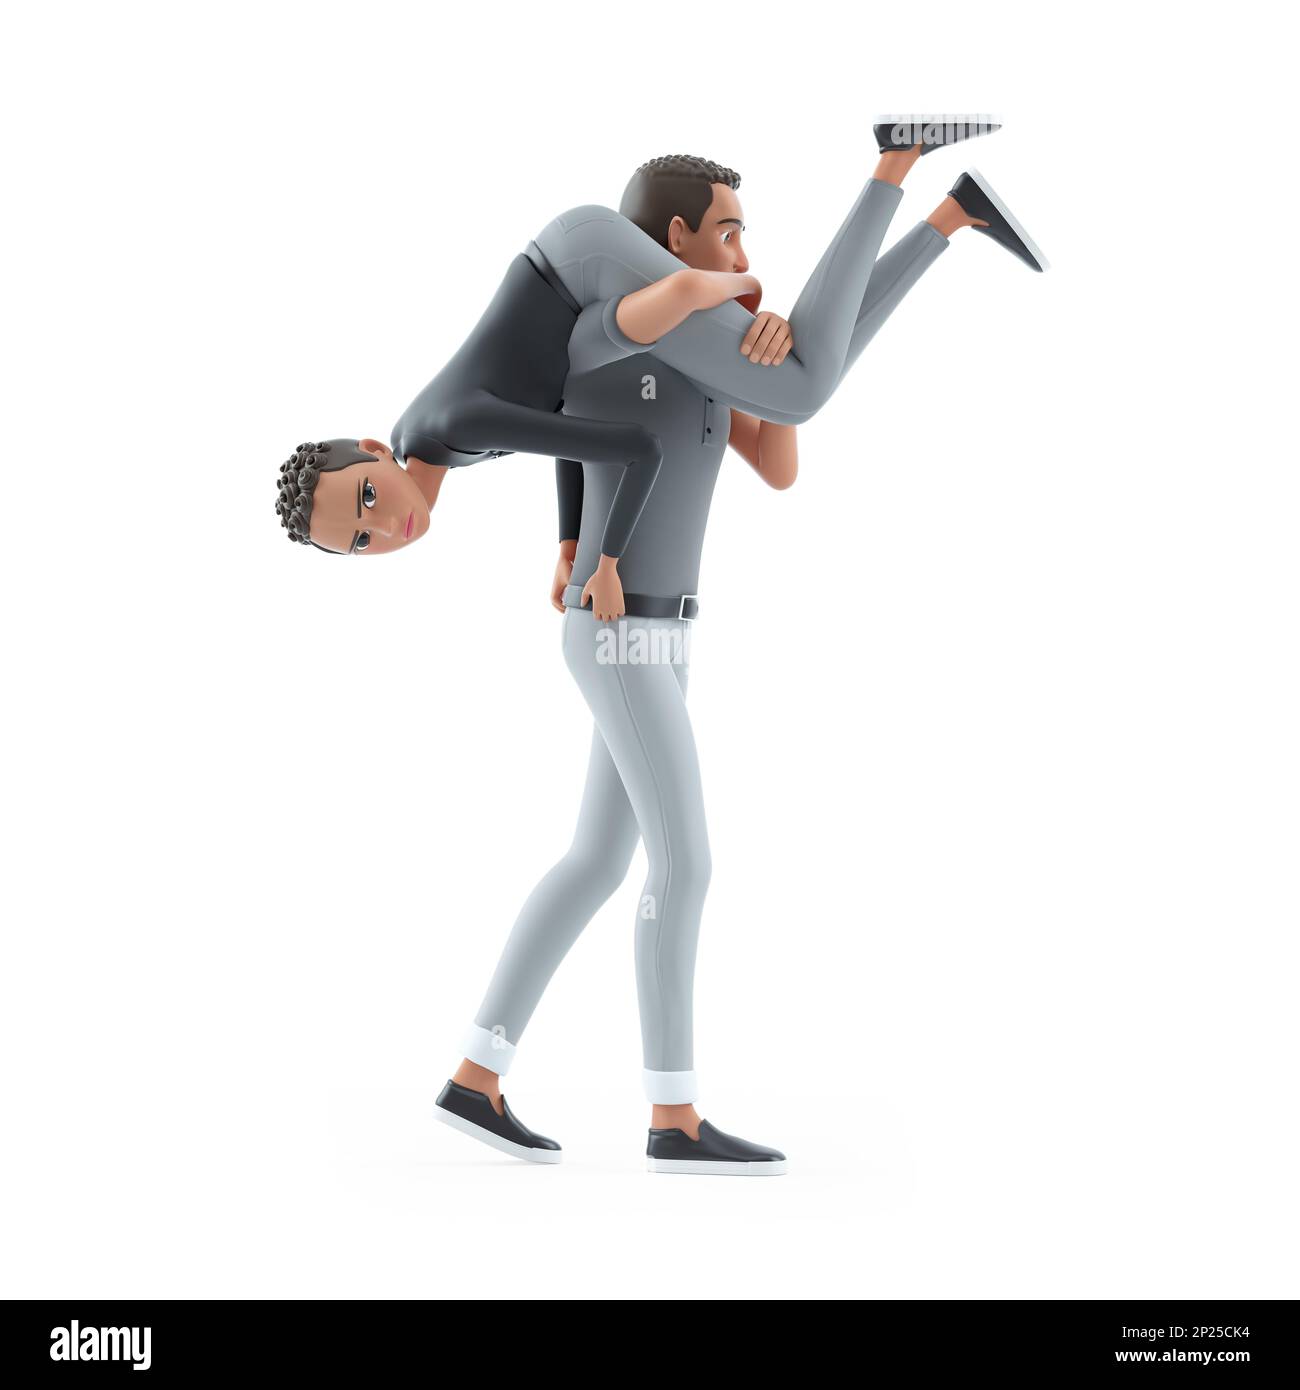 3d character man carrying angry woman on his shoulder, illustration isolated on white background Stock Photo